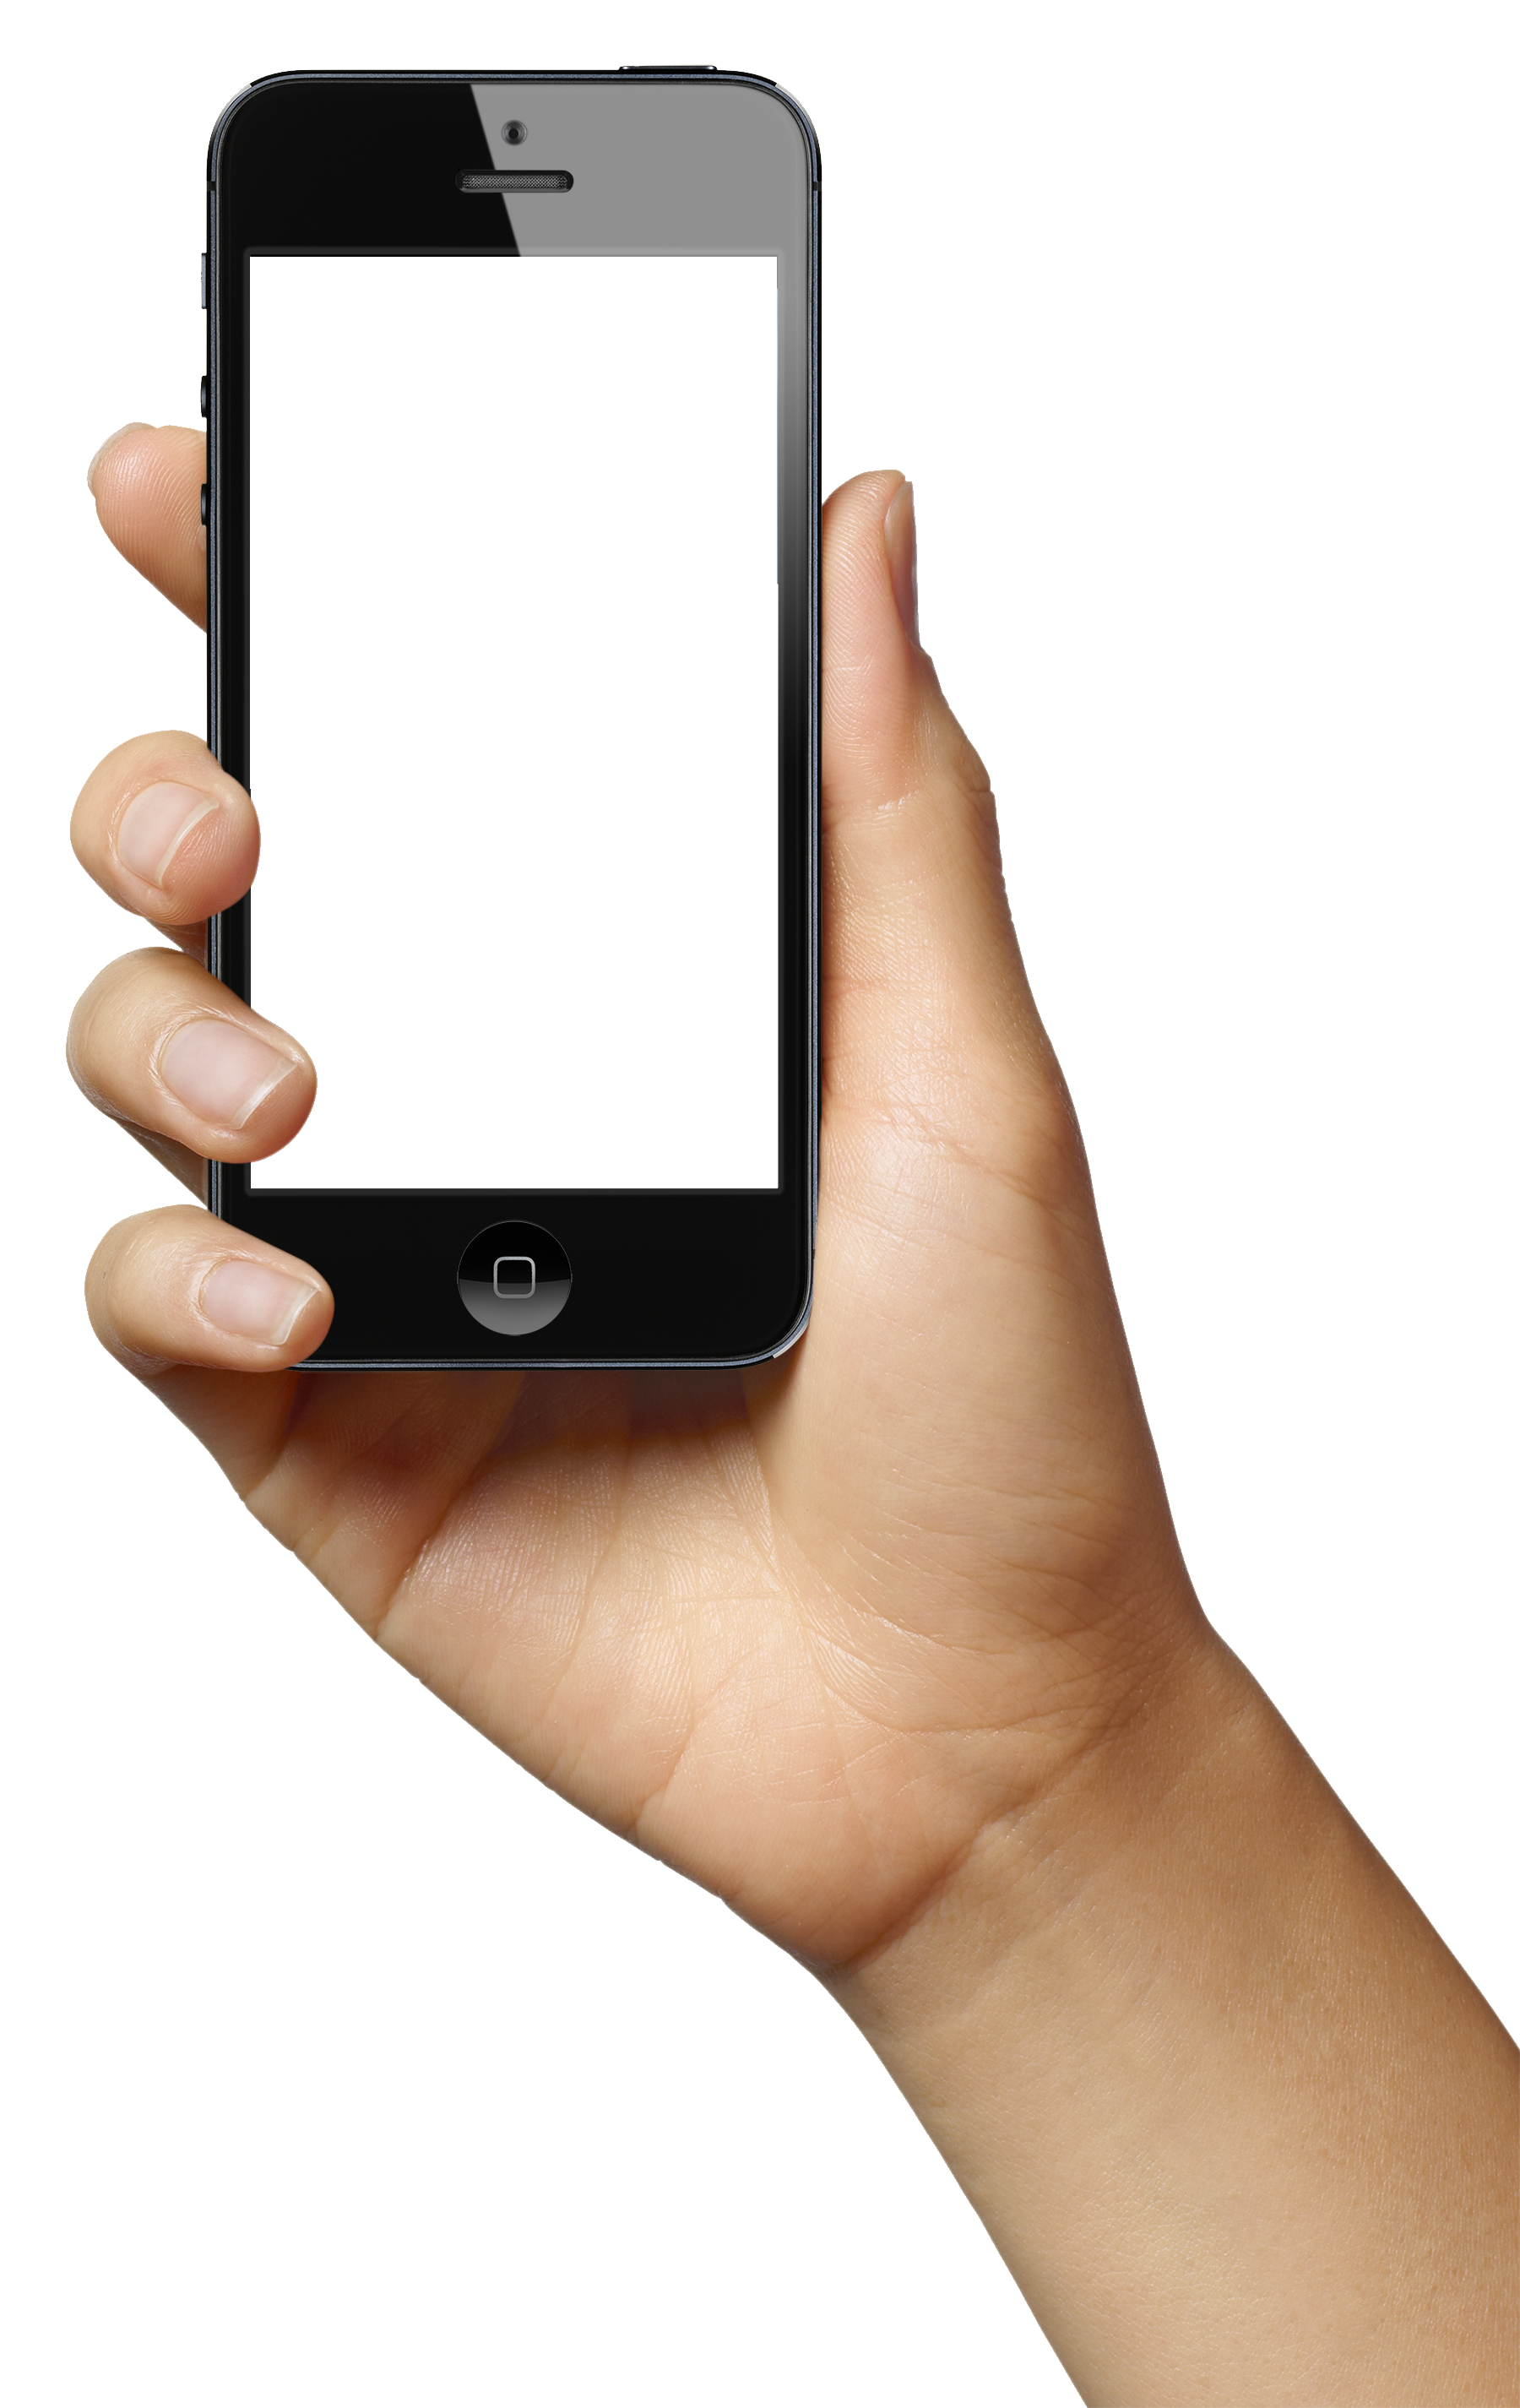 Phone In Hand Png